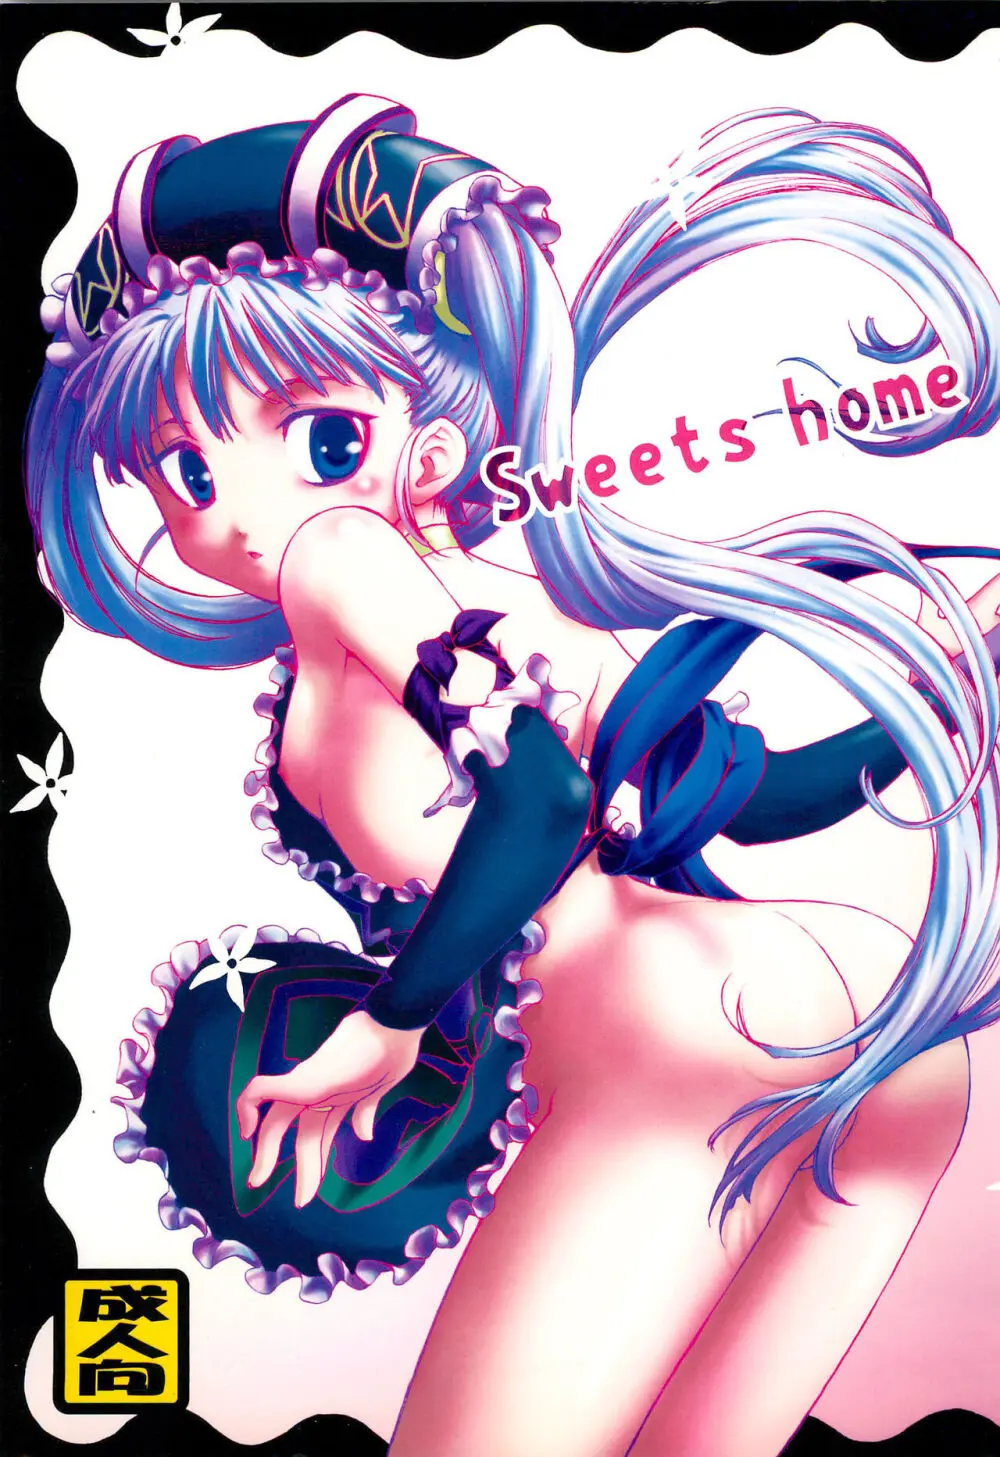 Sweets home - page1